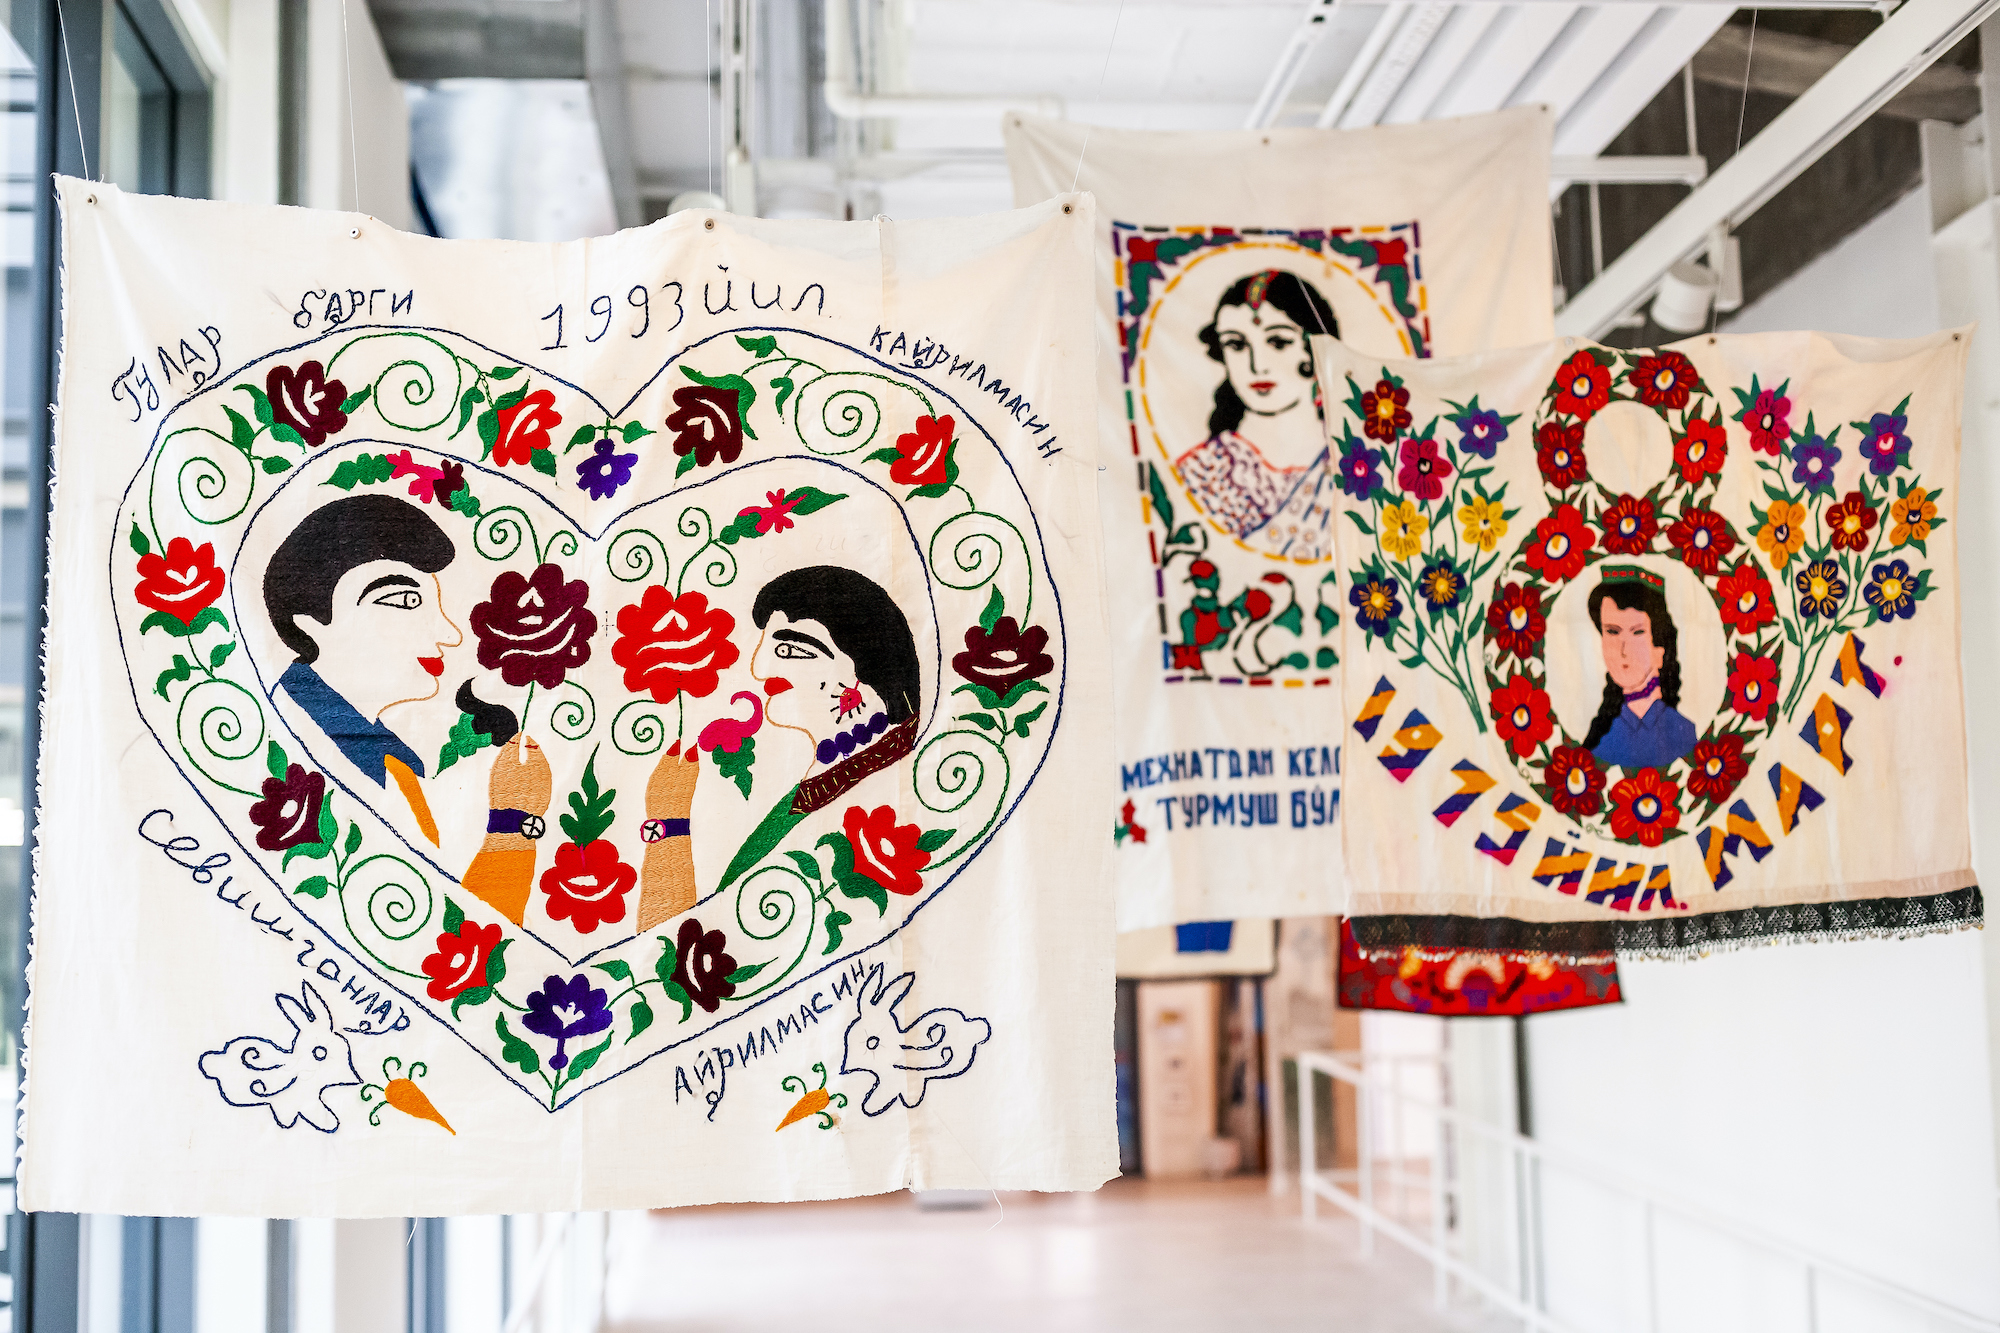 Image of several pieces of fabric hanging from the ceiling, each embroidered with colorful images of people and flowers.